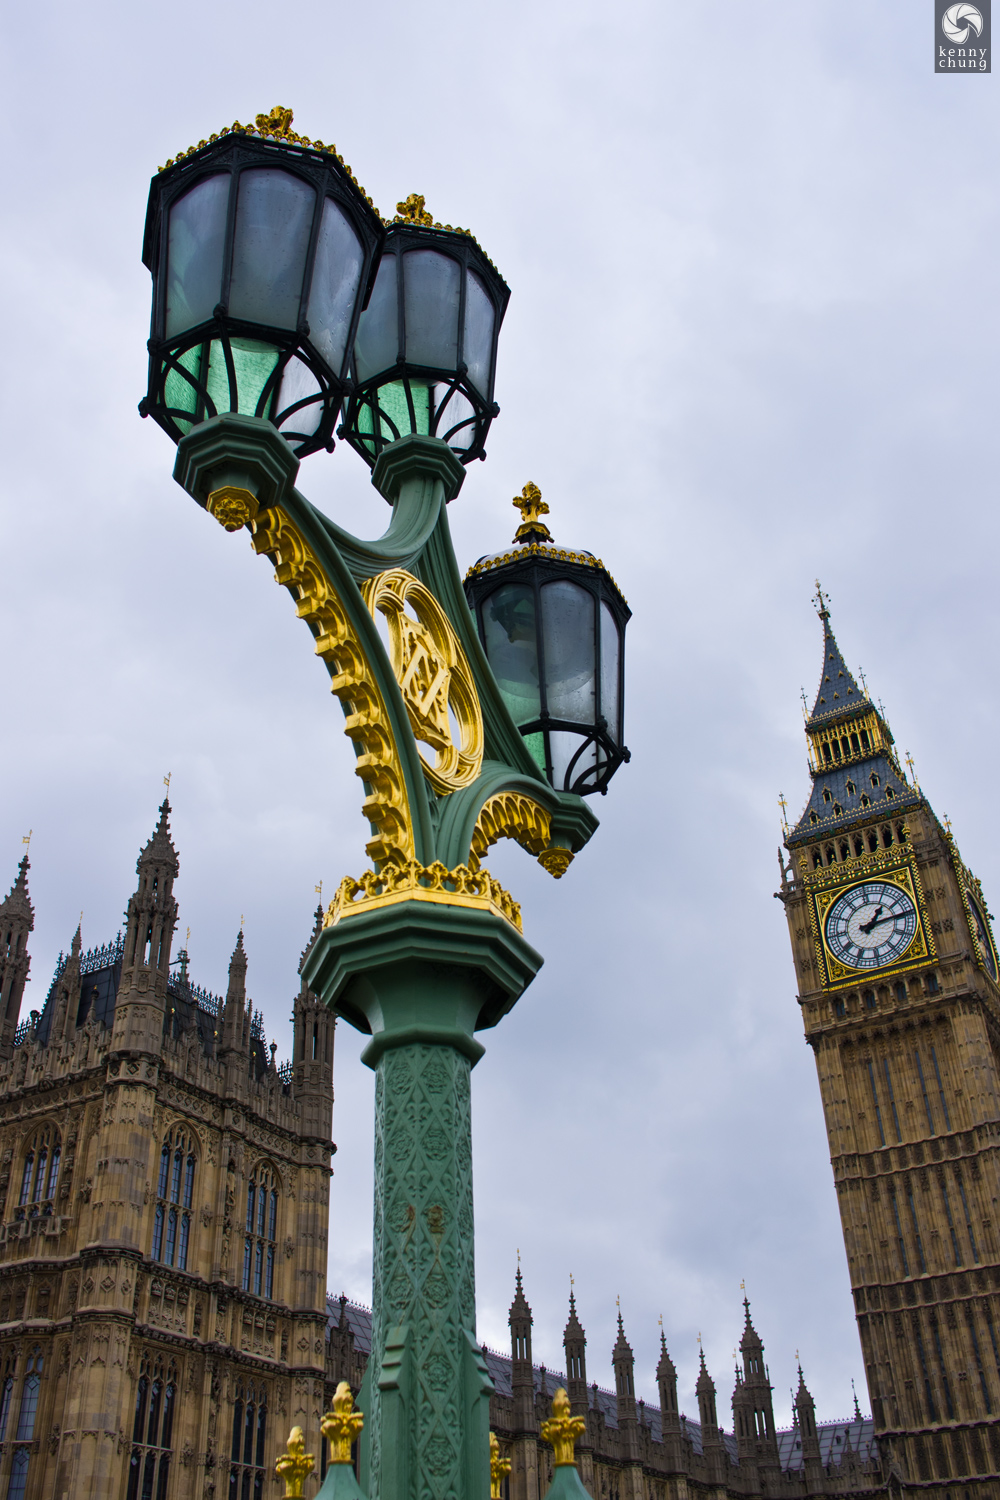 A street light in front of the Big Ben